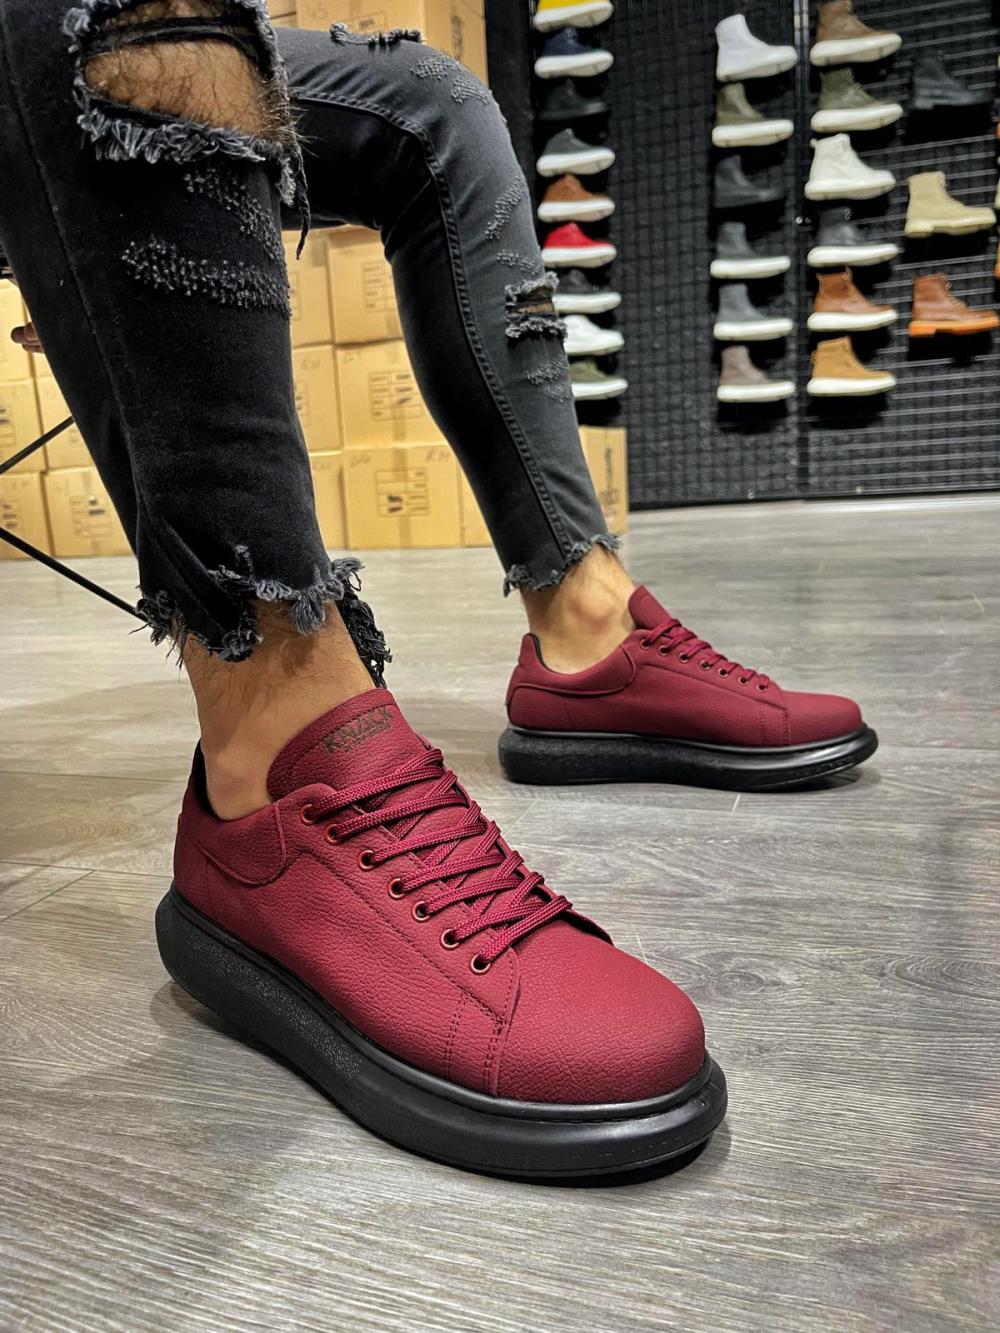 Knack High Sole Casual Shoes 045 Claret Red (Black Sole) - STREETMODE ™